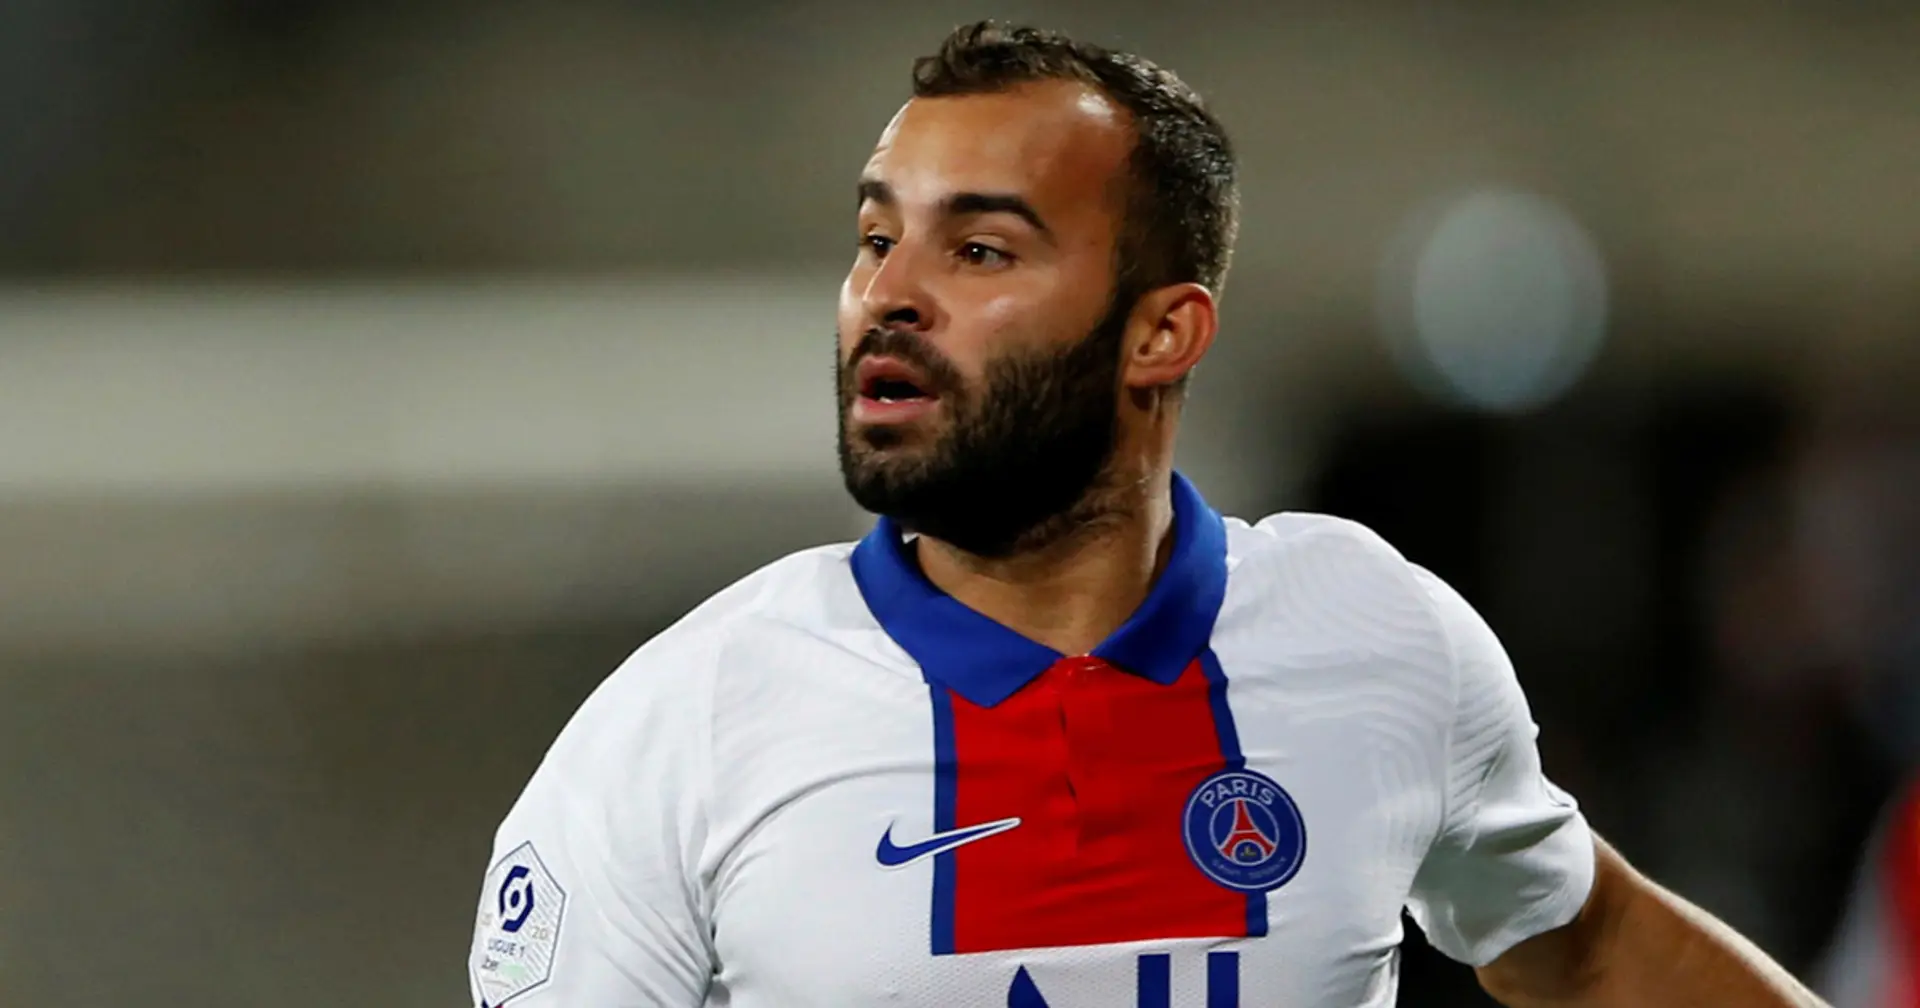 PSG terminate Jese Rodriguez's contract as ex-Madridista makes 18 appearances across 4 years